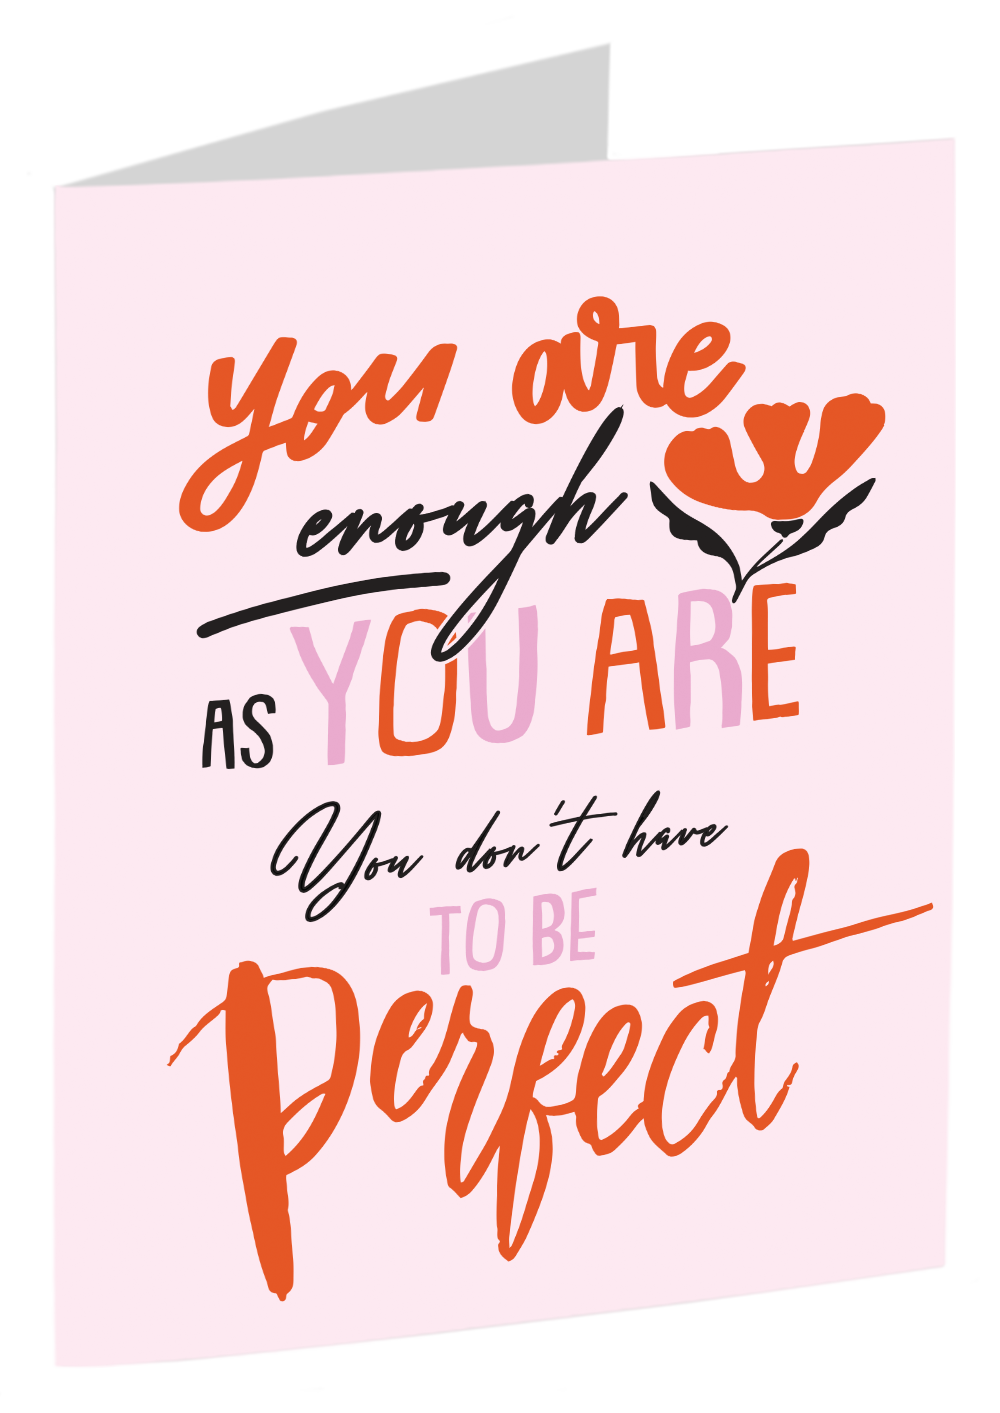 "You Are Enough As You Are - You Don't Have To Be Perfect" - An Inspiring, Uplifting Card